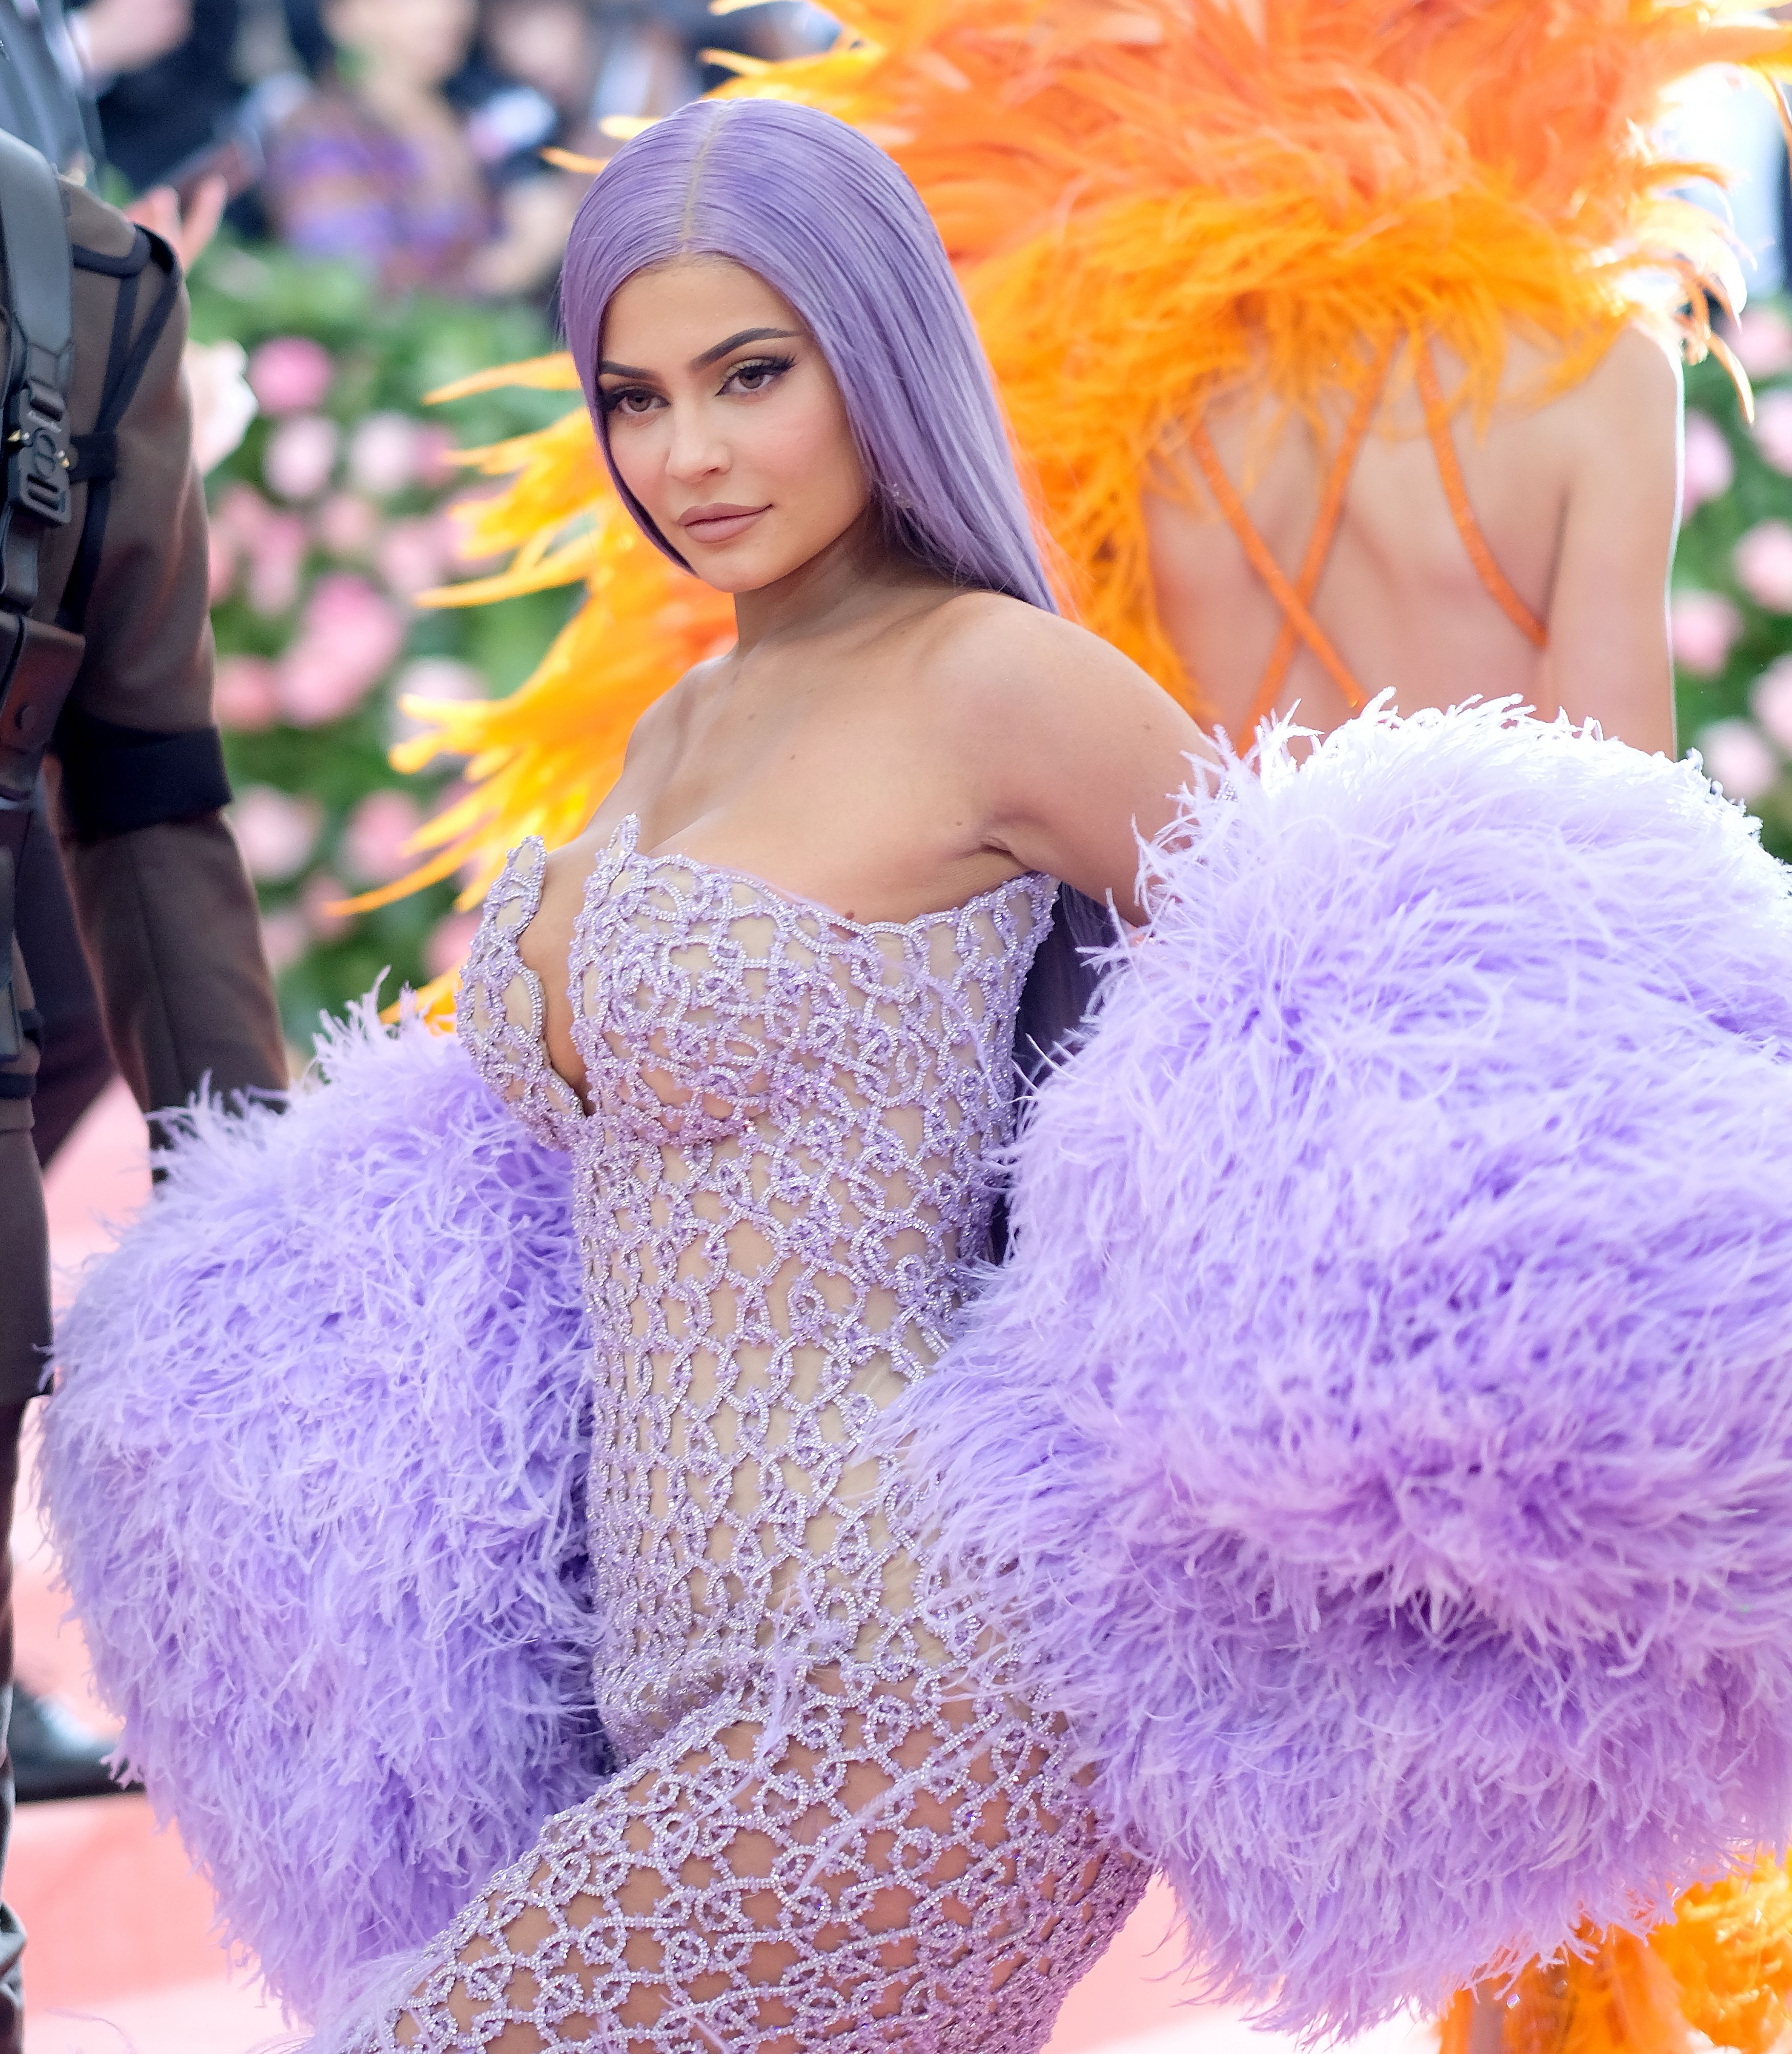 Kylie Jenner during the 2019 Met Gala "Celebrating Camp: Notes on Fashion" at Metropolitan Museum of Art on May 06, 2019 in New York City. | Source: Getty Images